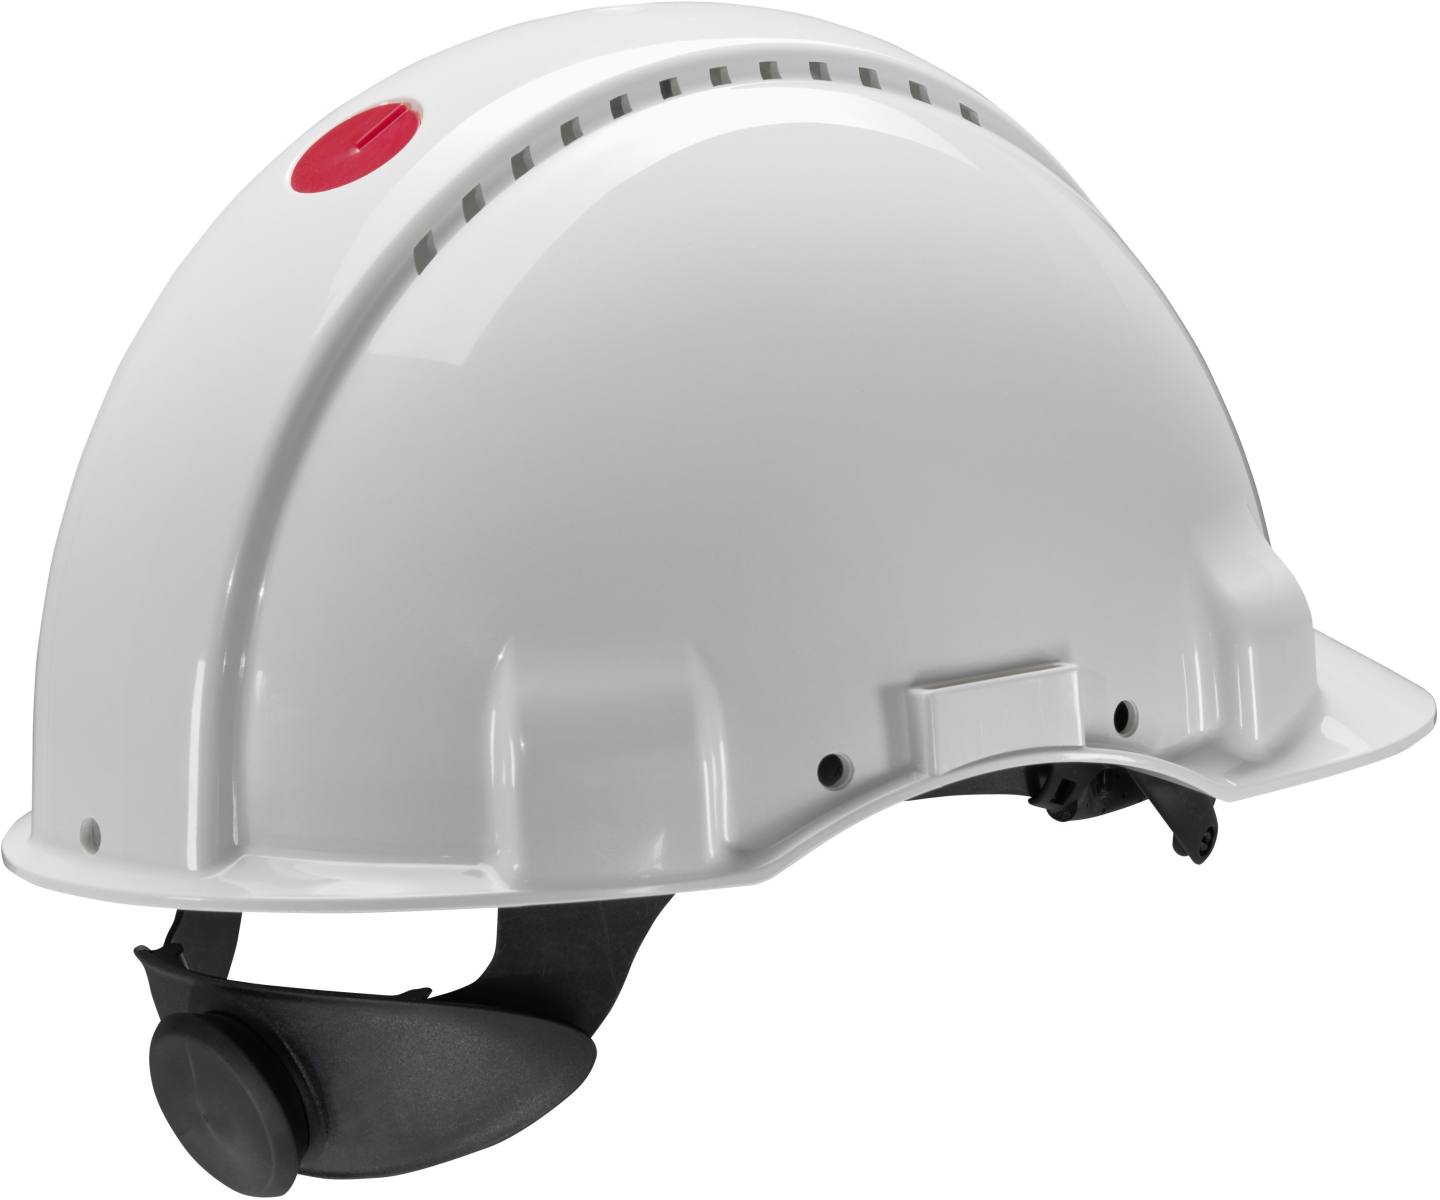 3M Safety helmet, Uvicator, ratchet fastening, non-ventilated, dielectric 1000 V, leather sweatband, white, G3001MUV-VI